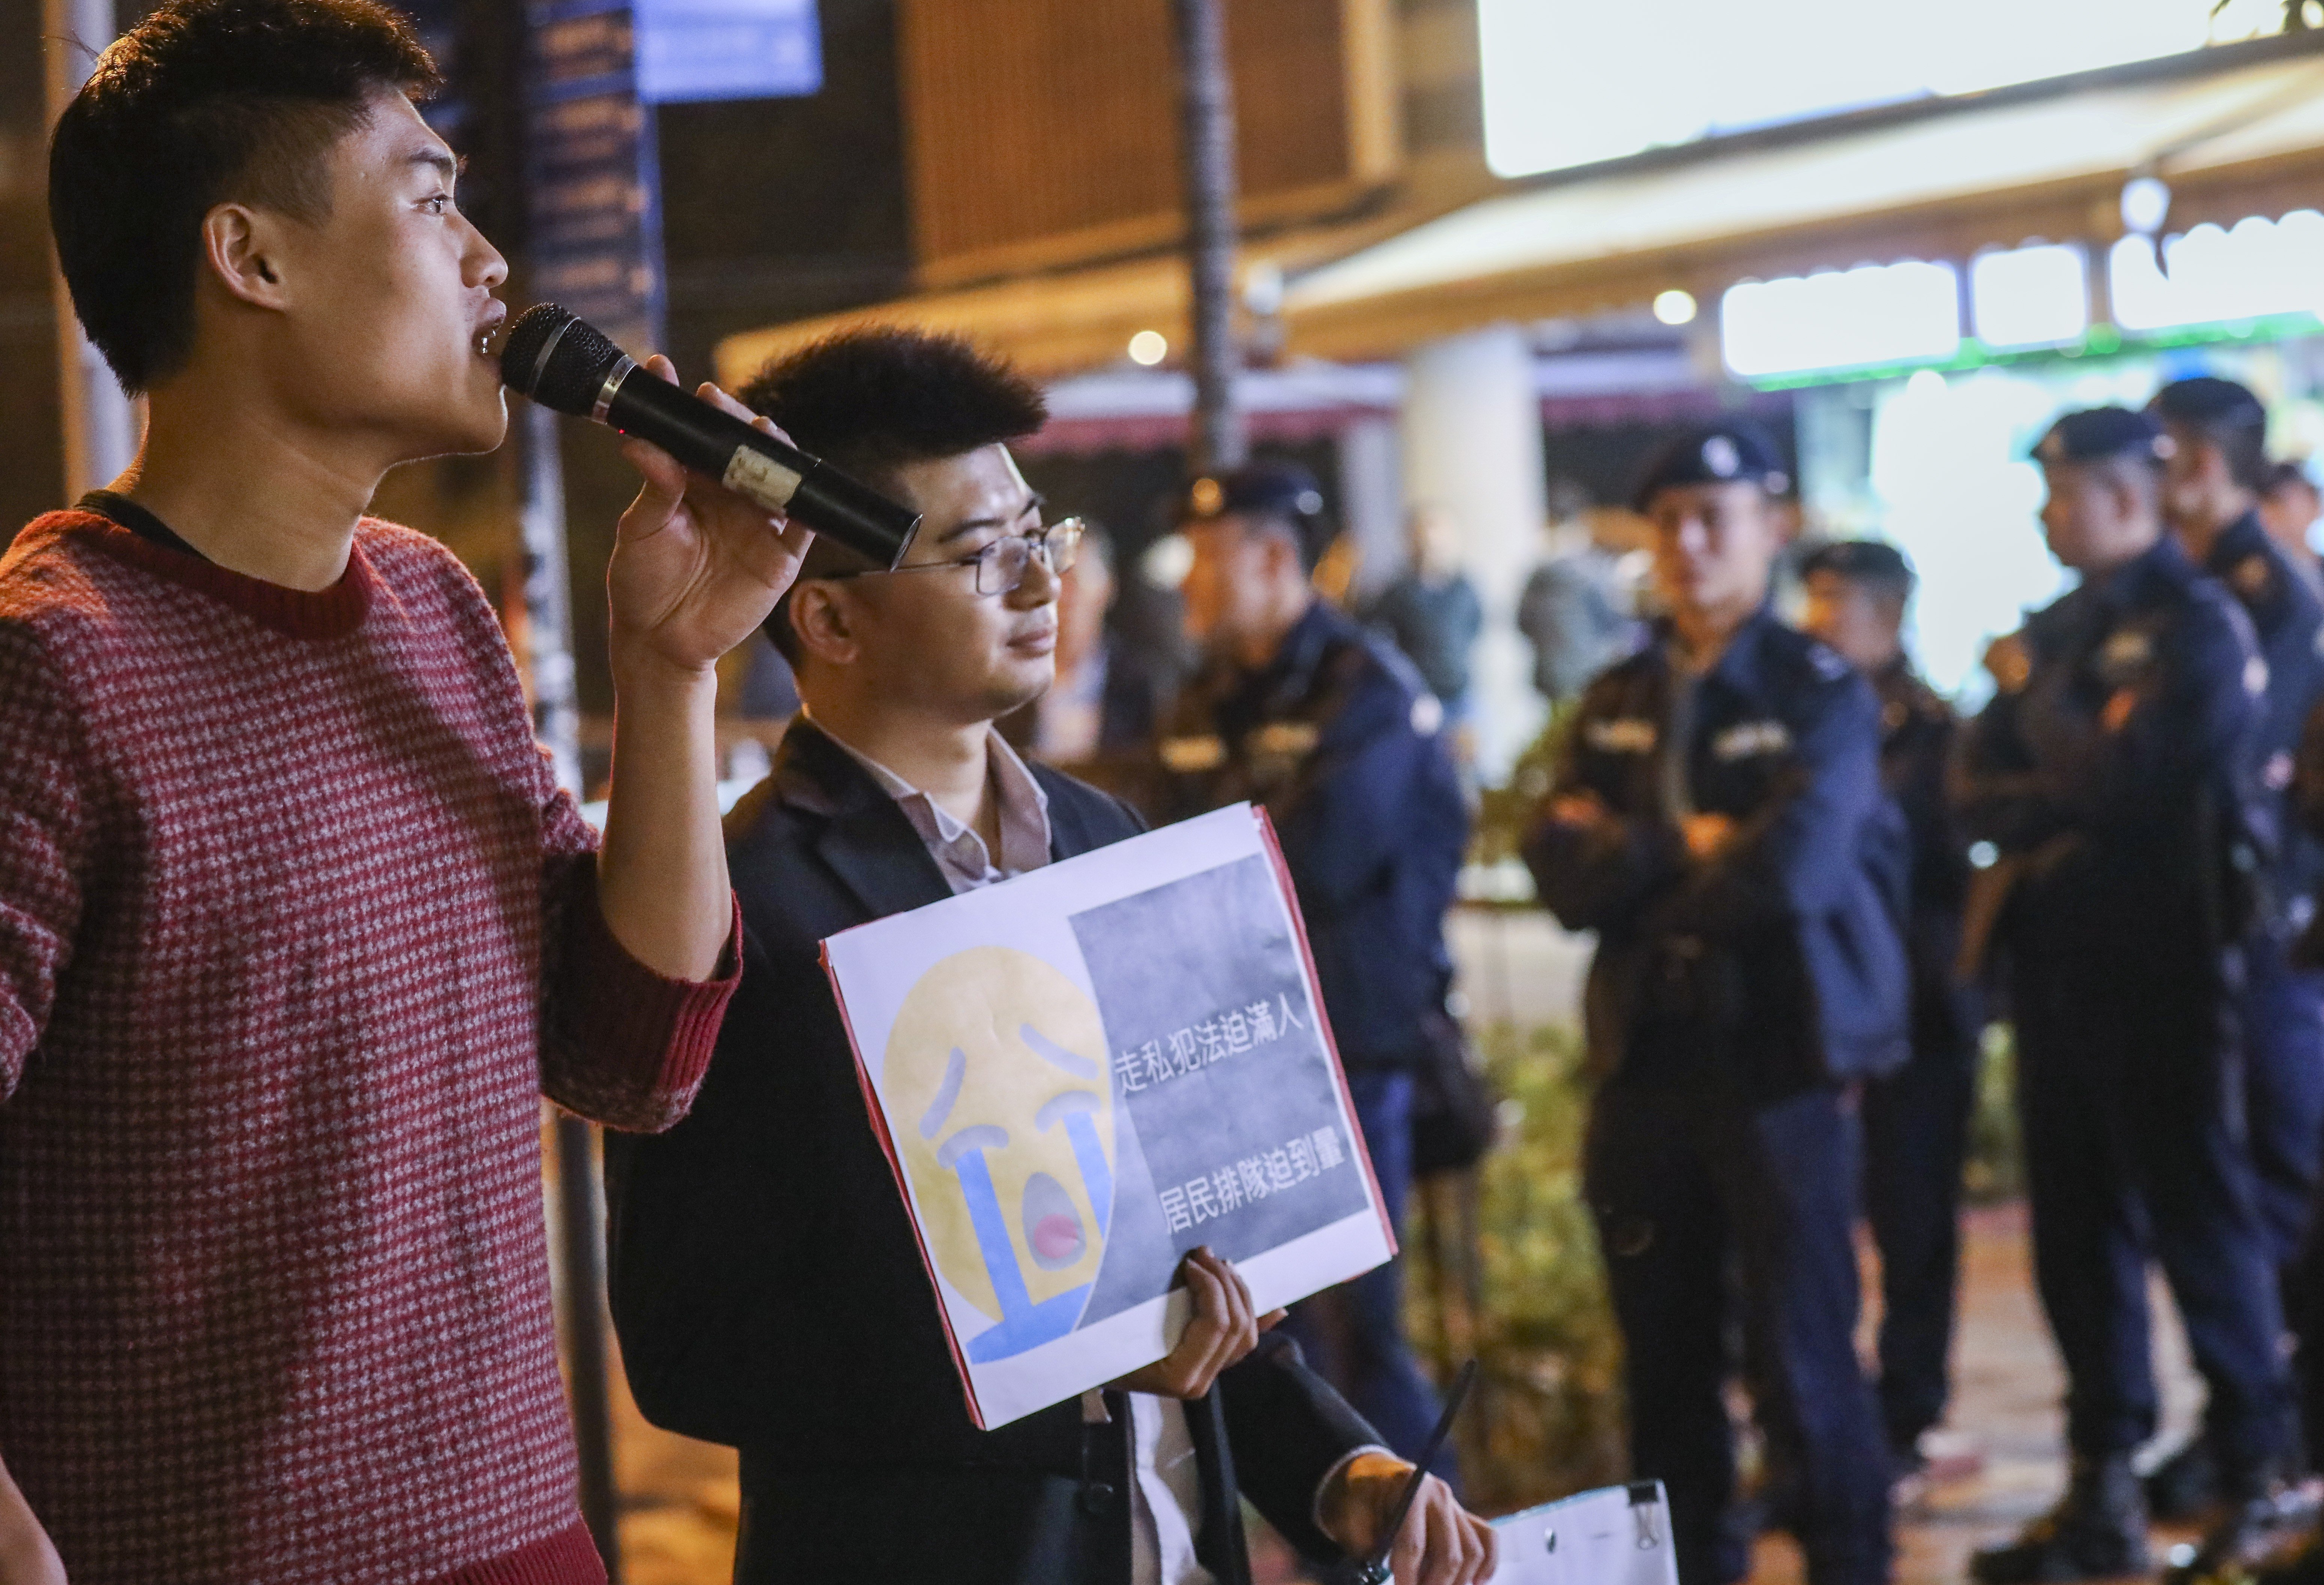 Police and demonstrators in Tin Shui Wai where parallel trading activity has sparked resident complaints. Photo: Dickson Lee